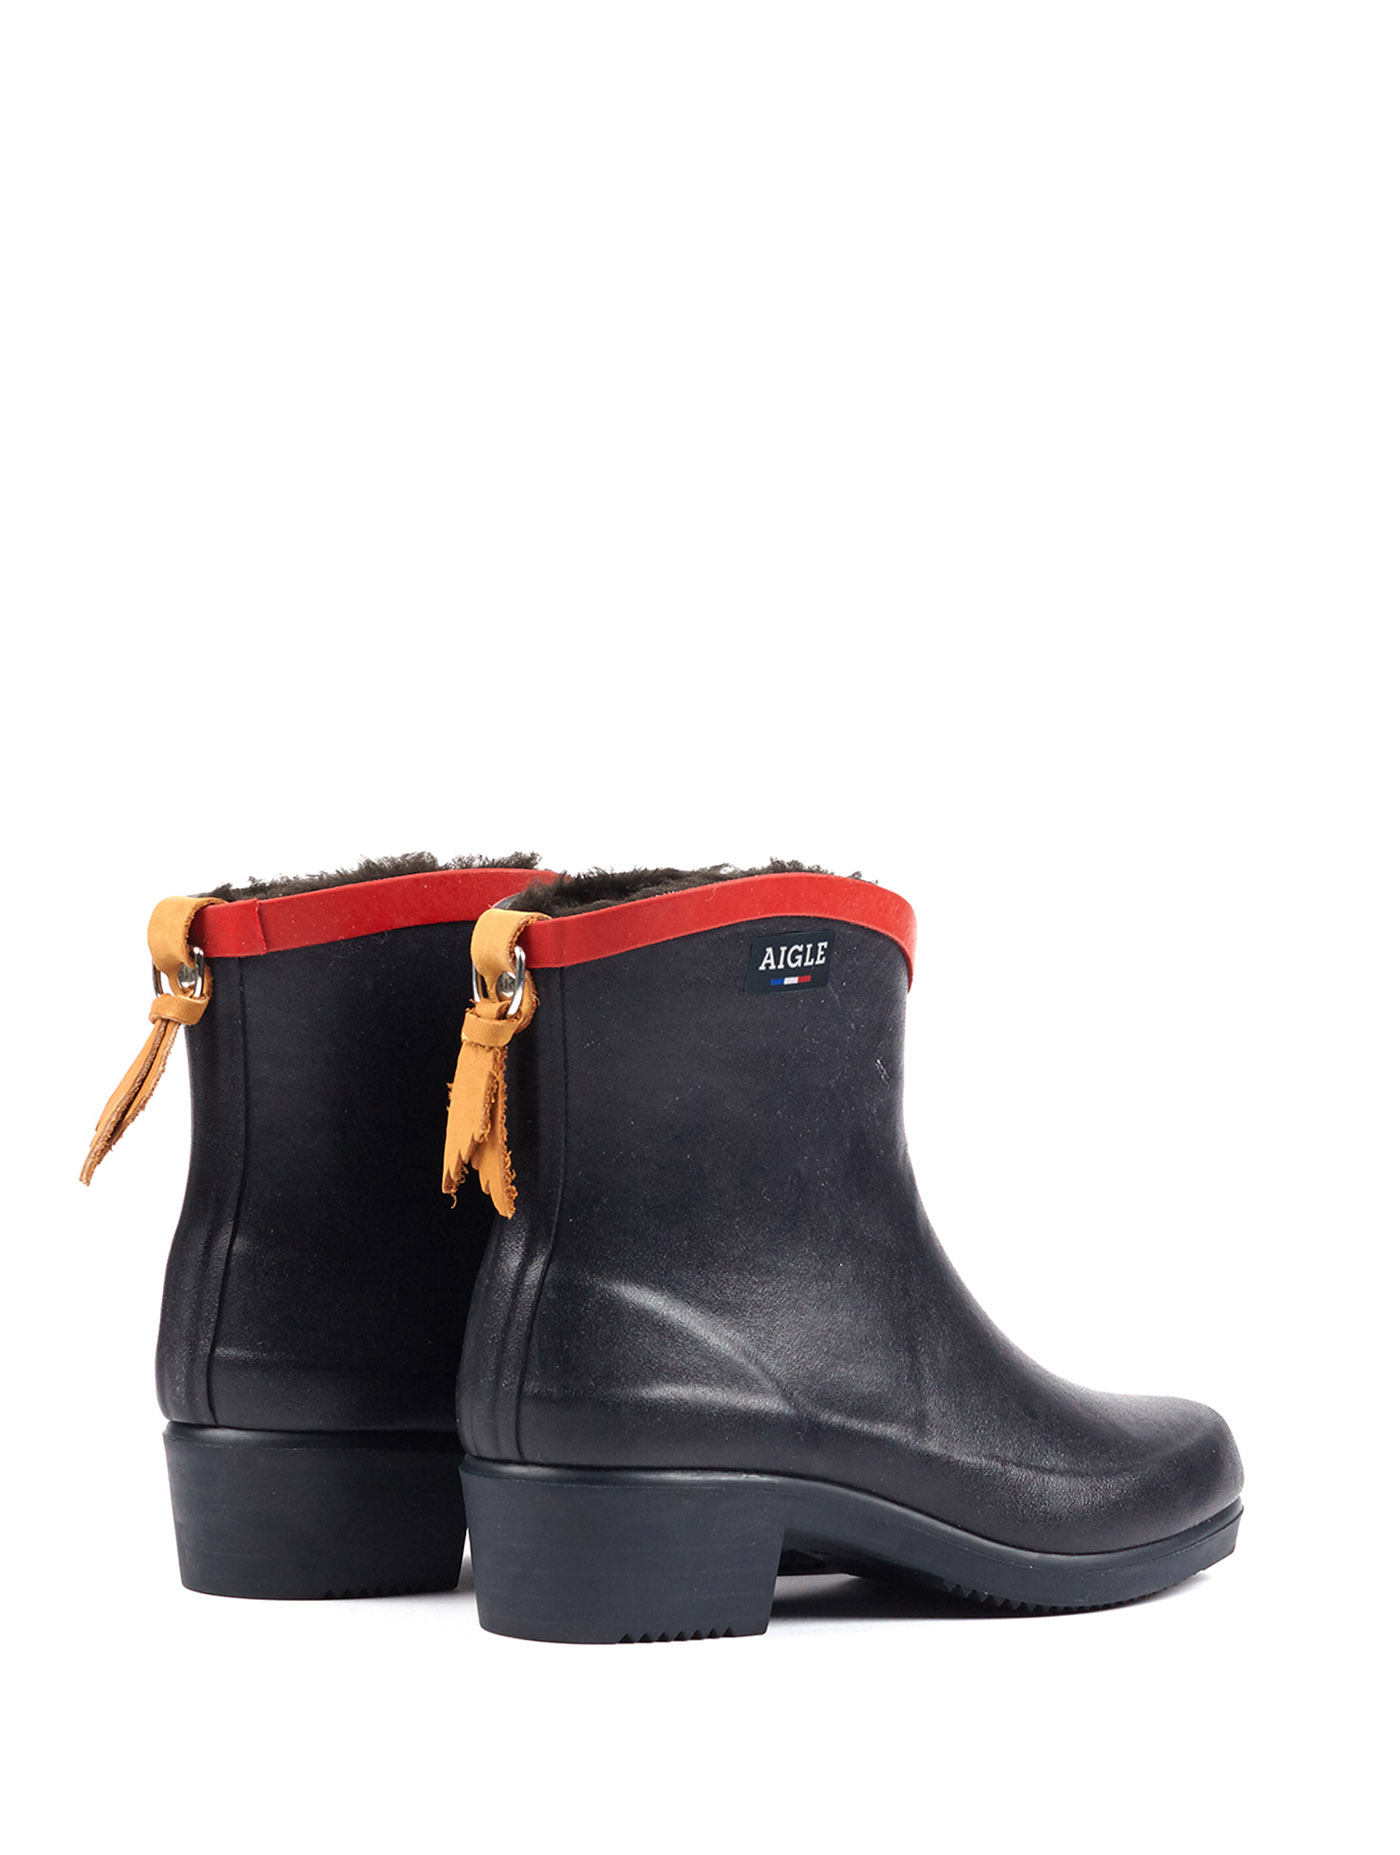 aigle fur lined boots